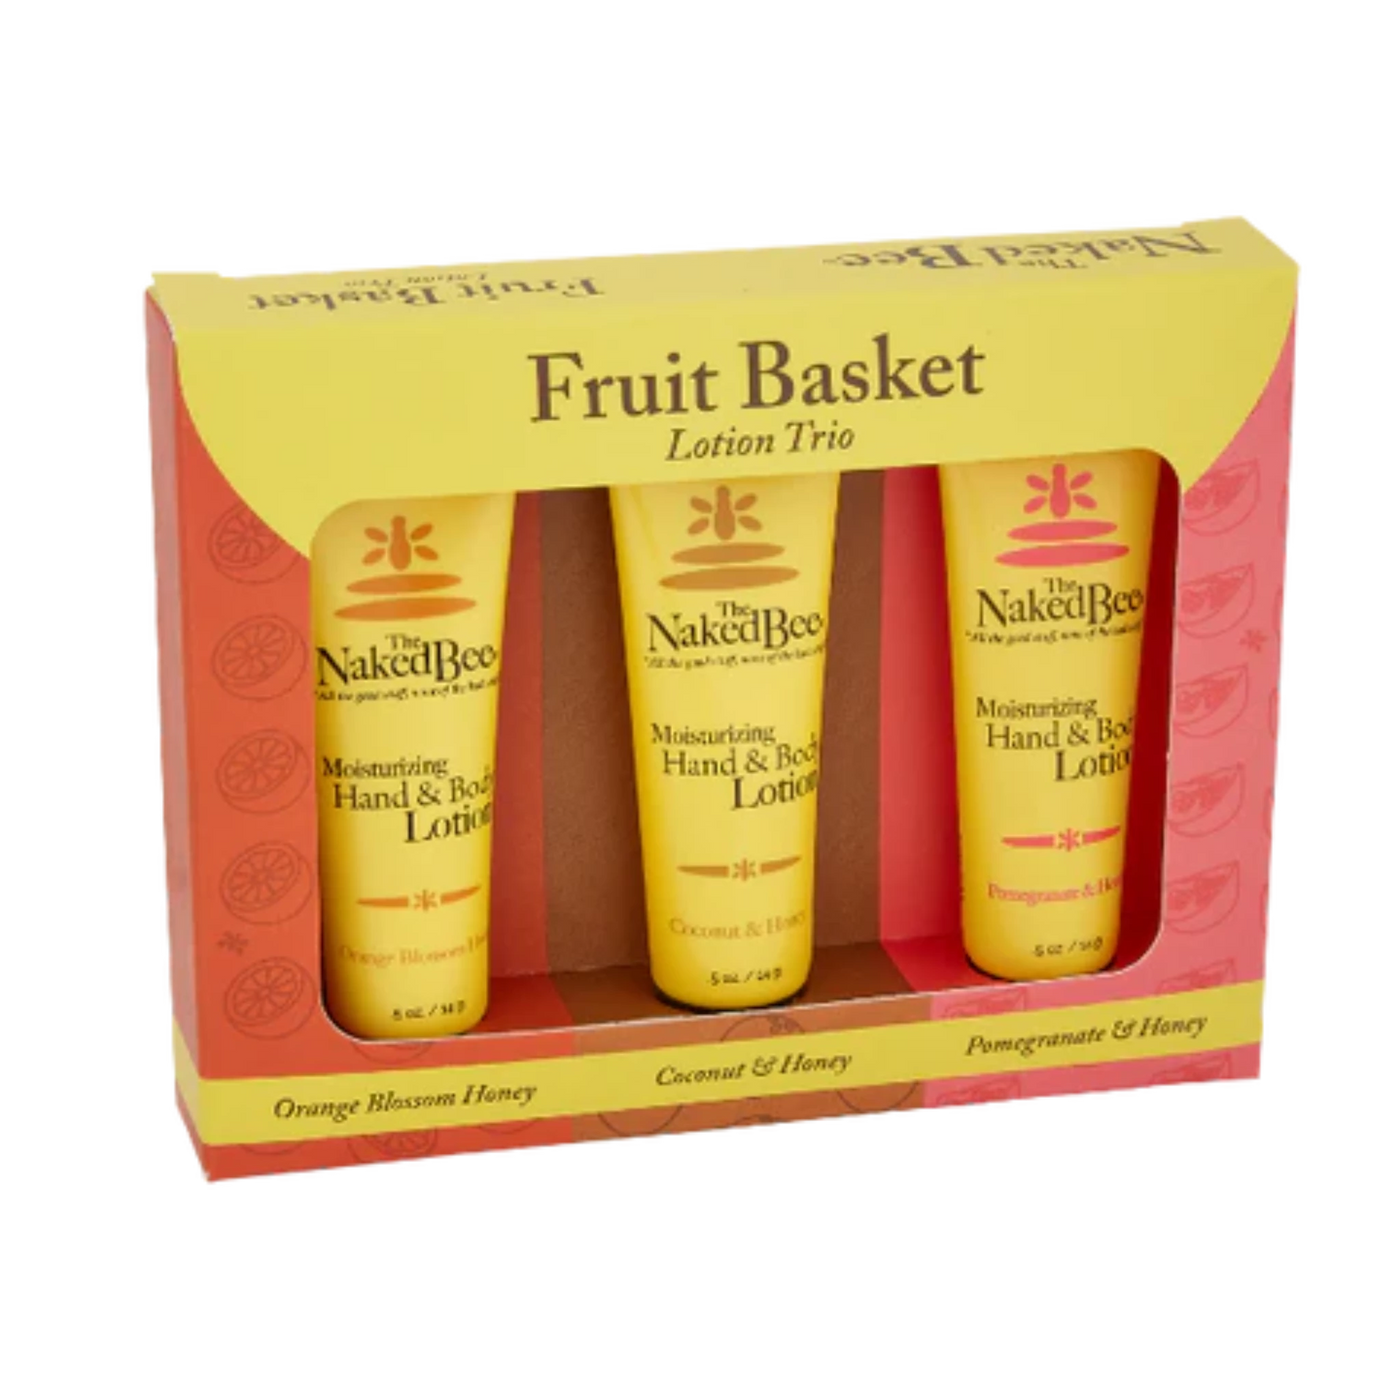 The Naked Bee - Fruit Basket Lotion Trio